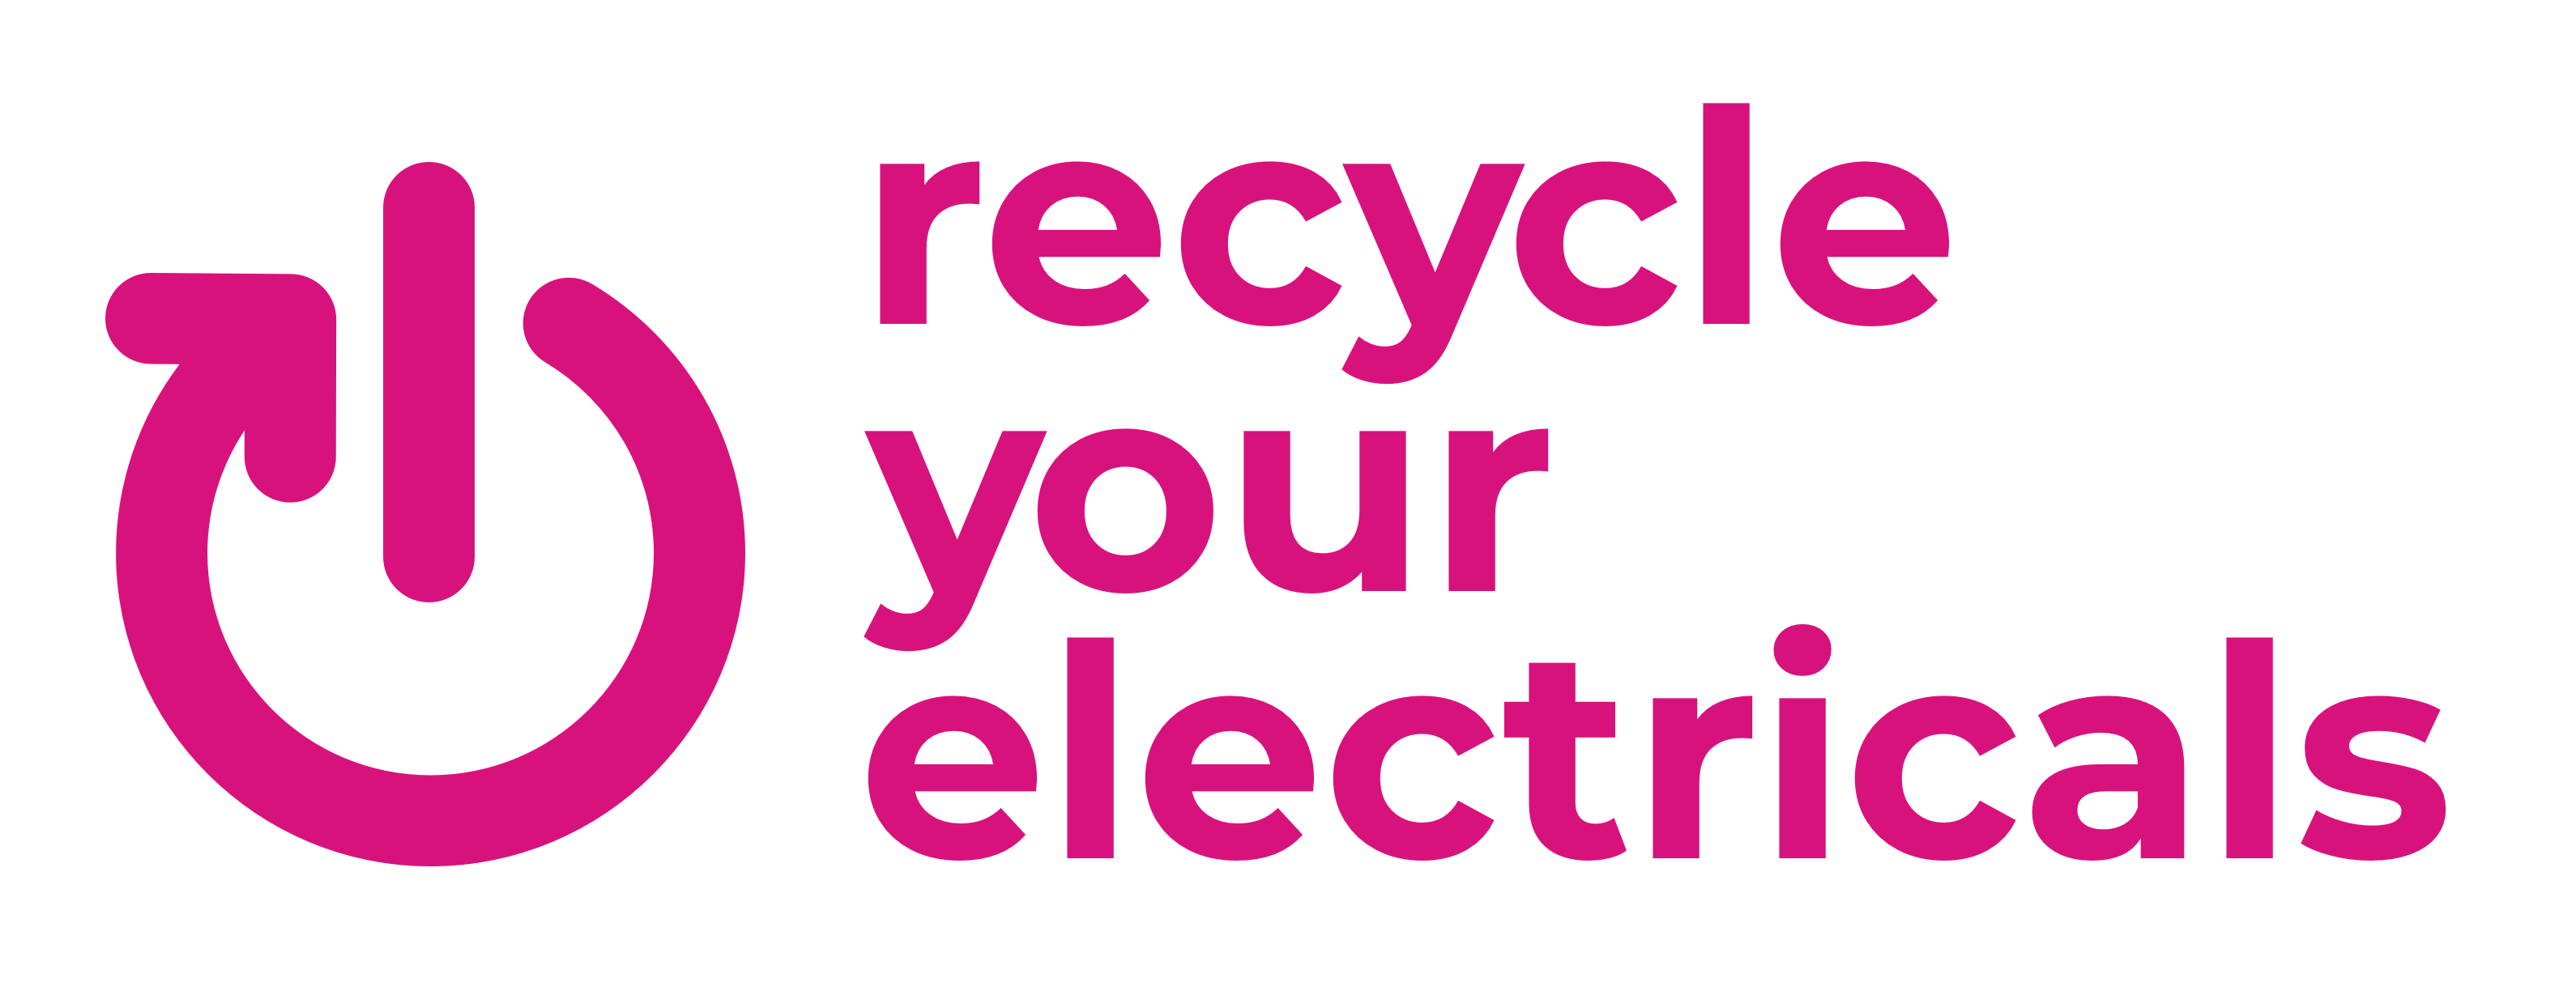 Recycle your electrical